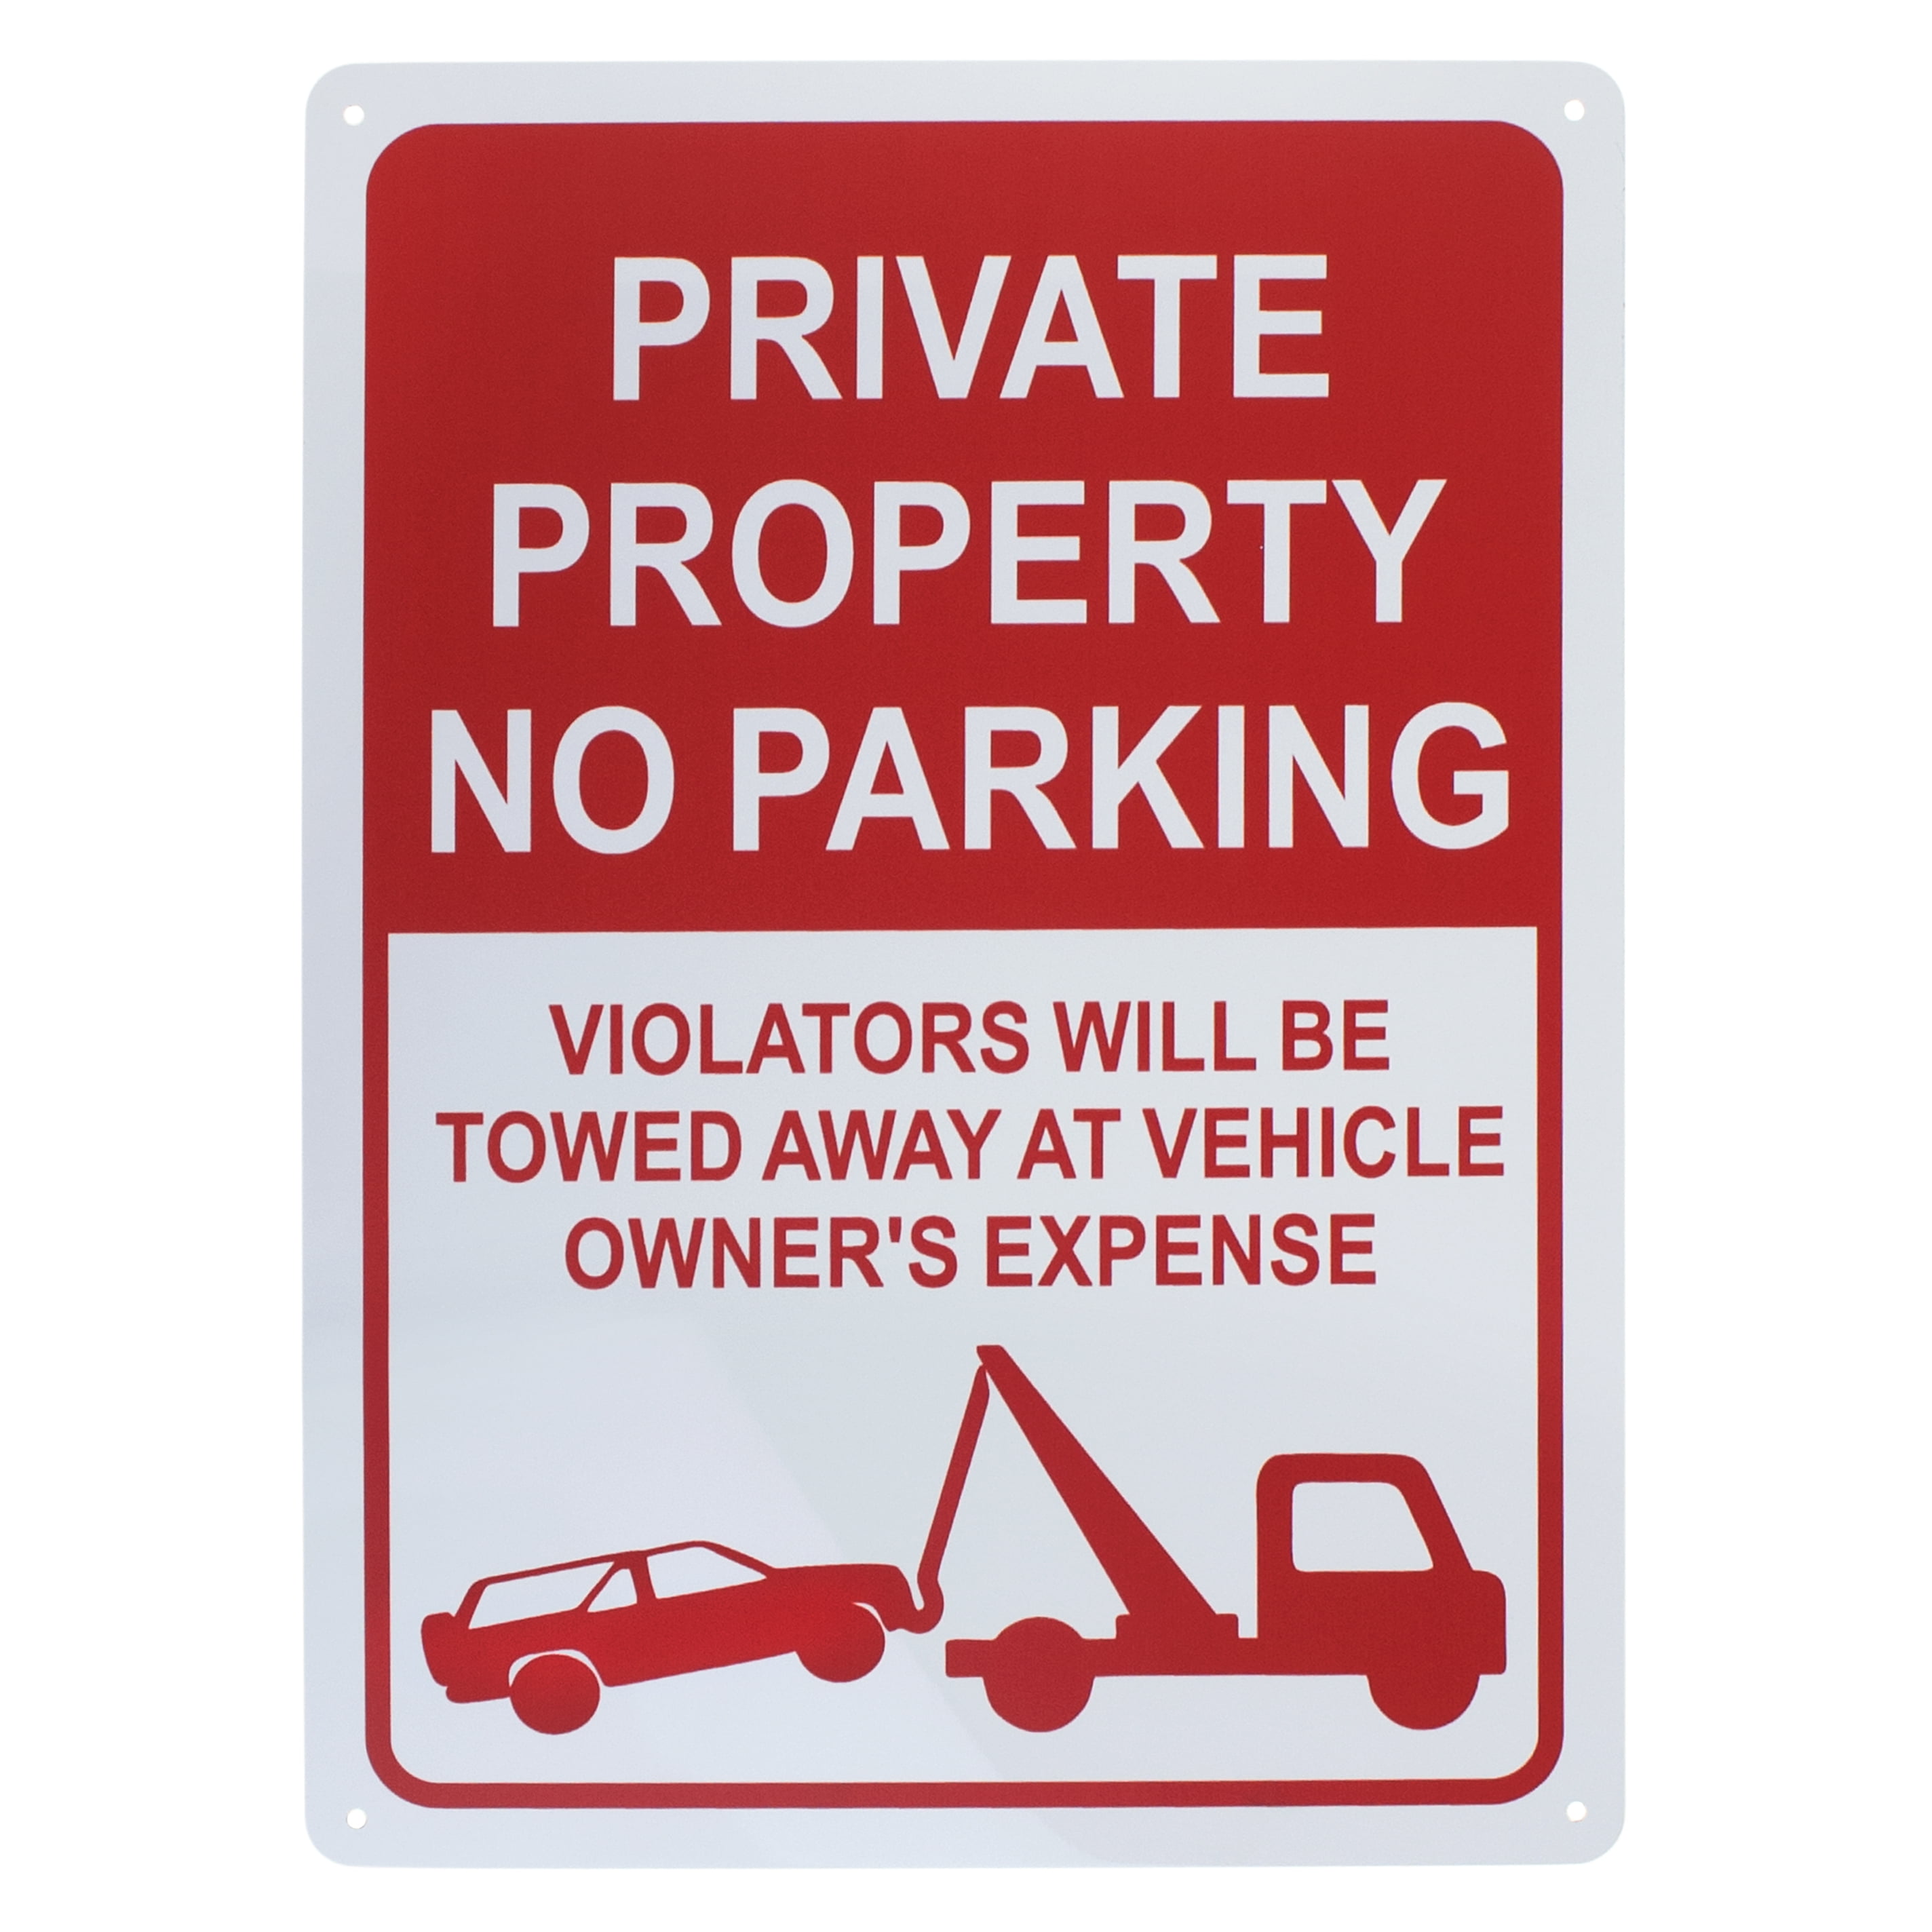 No Parking Sign 9x12 Aluminum Private Property Vehicles Towed Owners Expense 